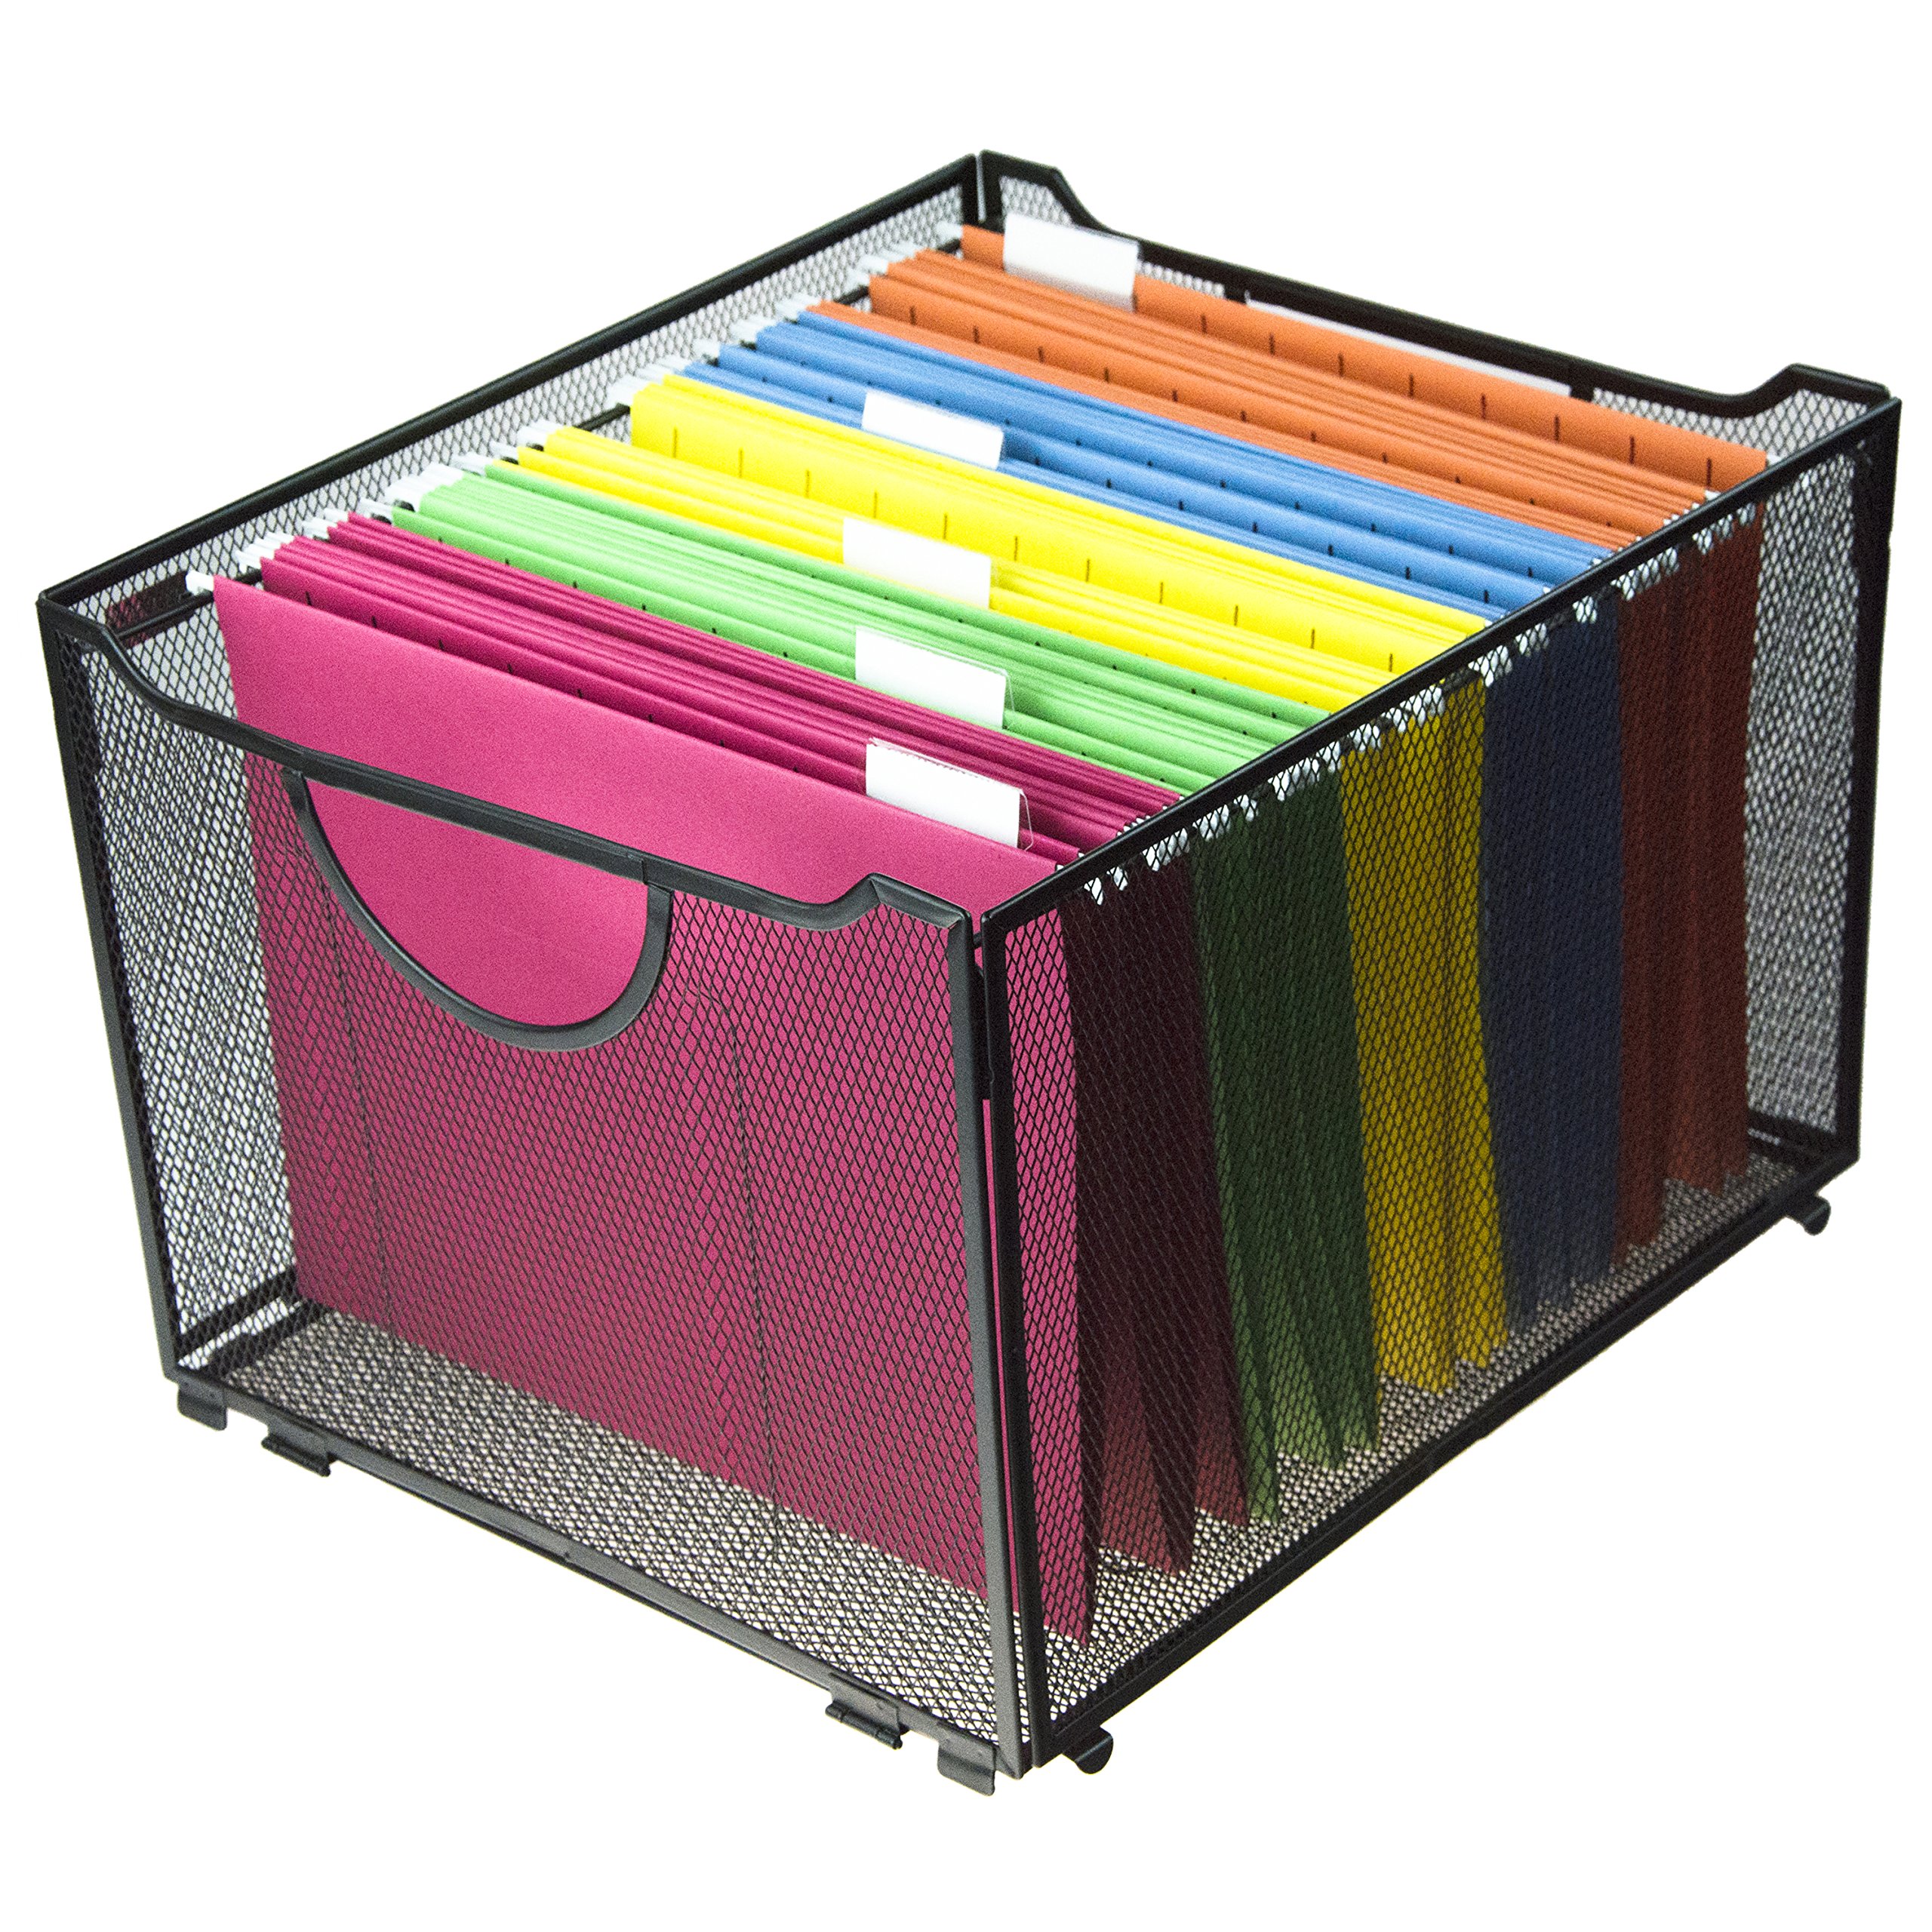 File folders and storage boxes